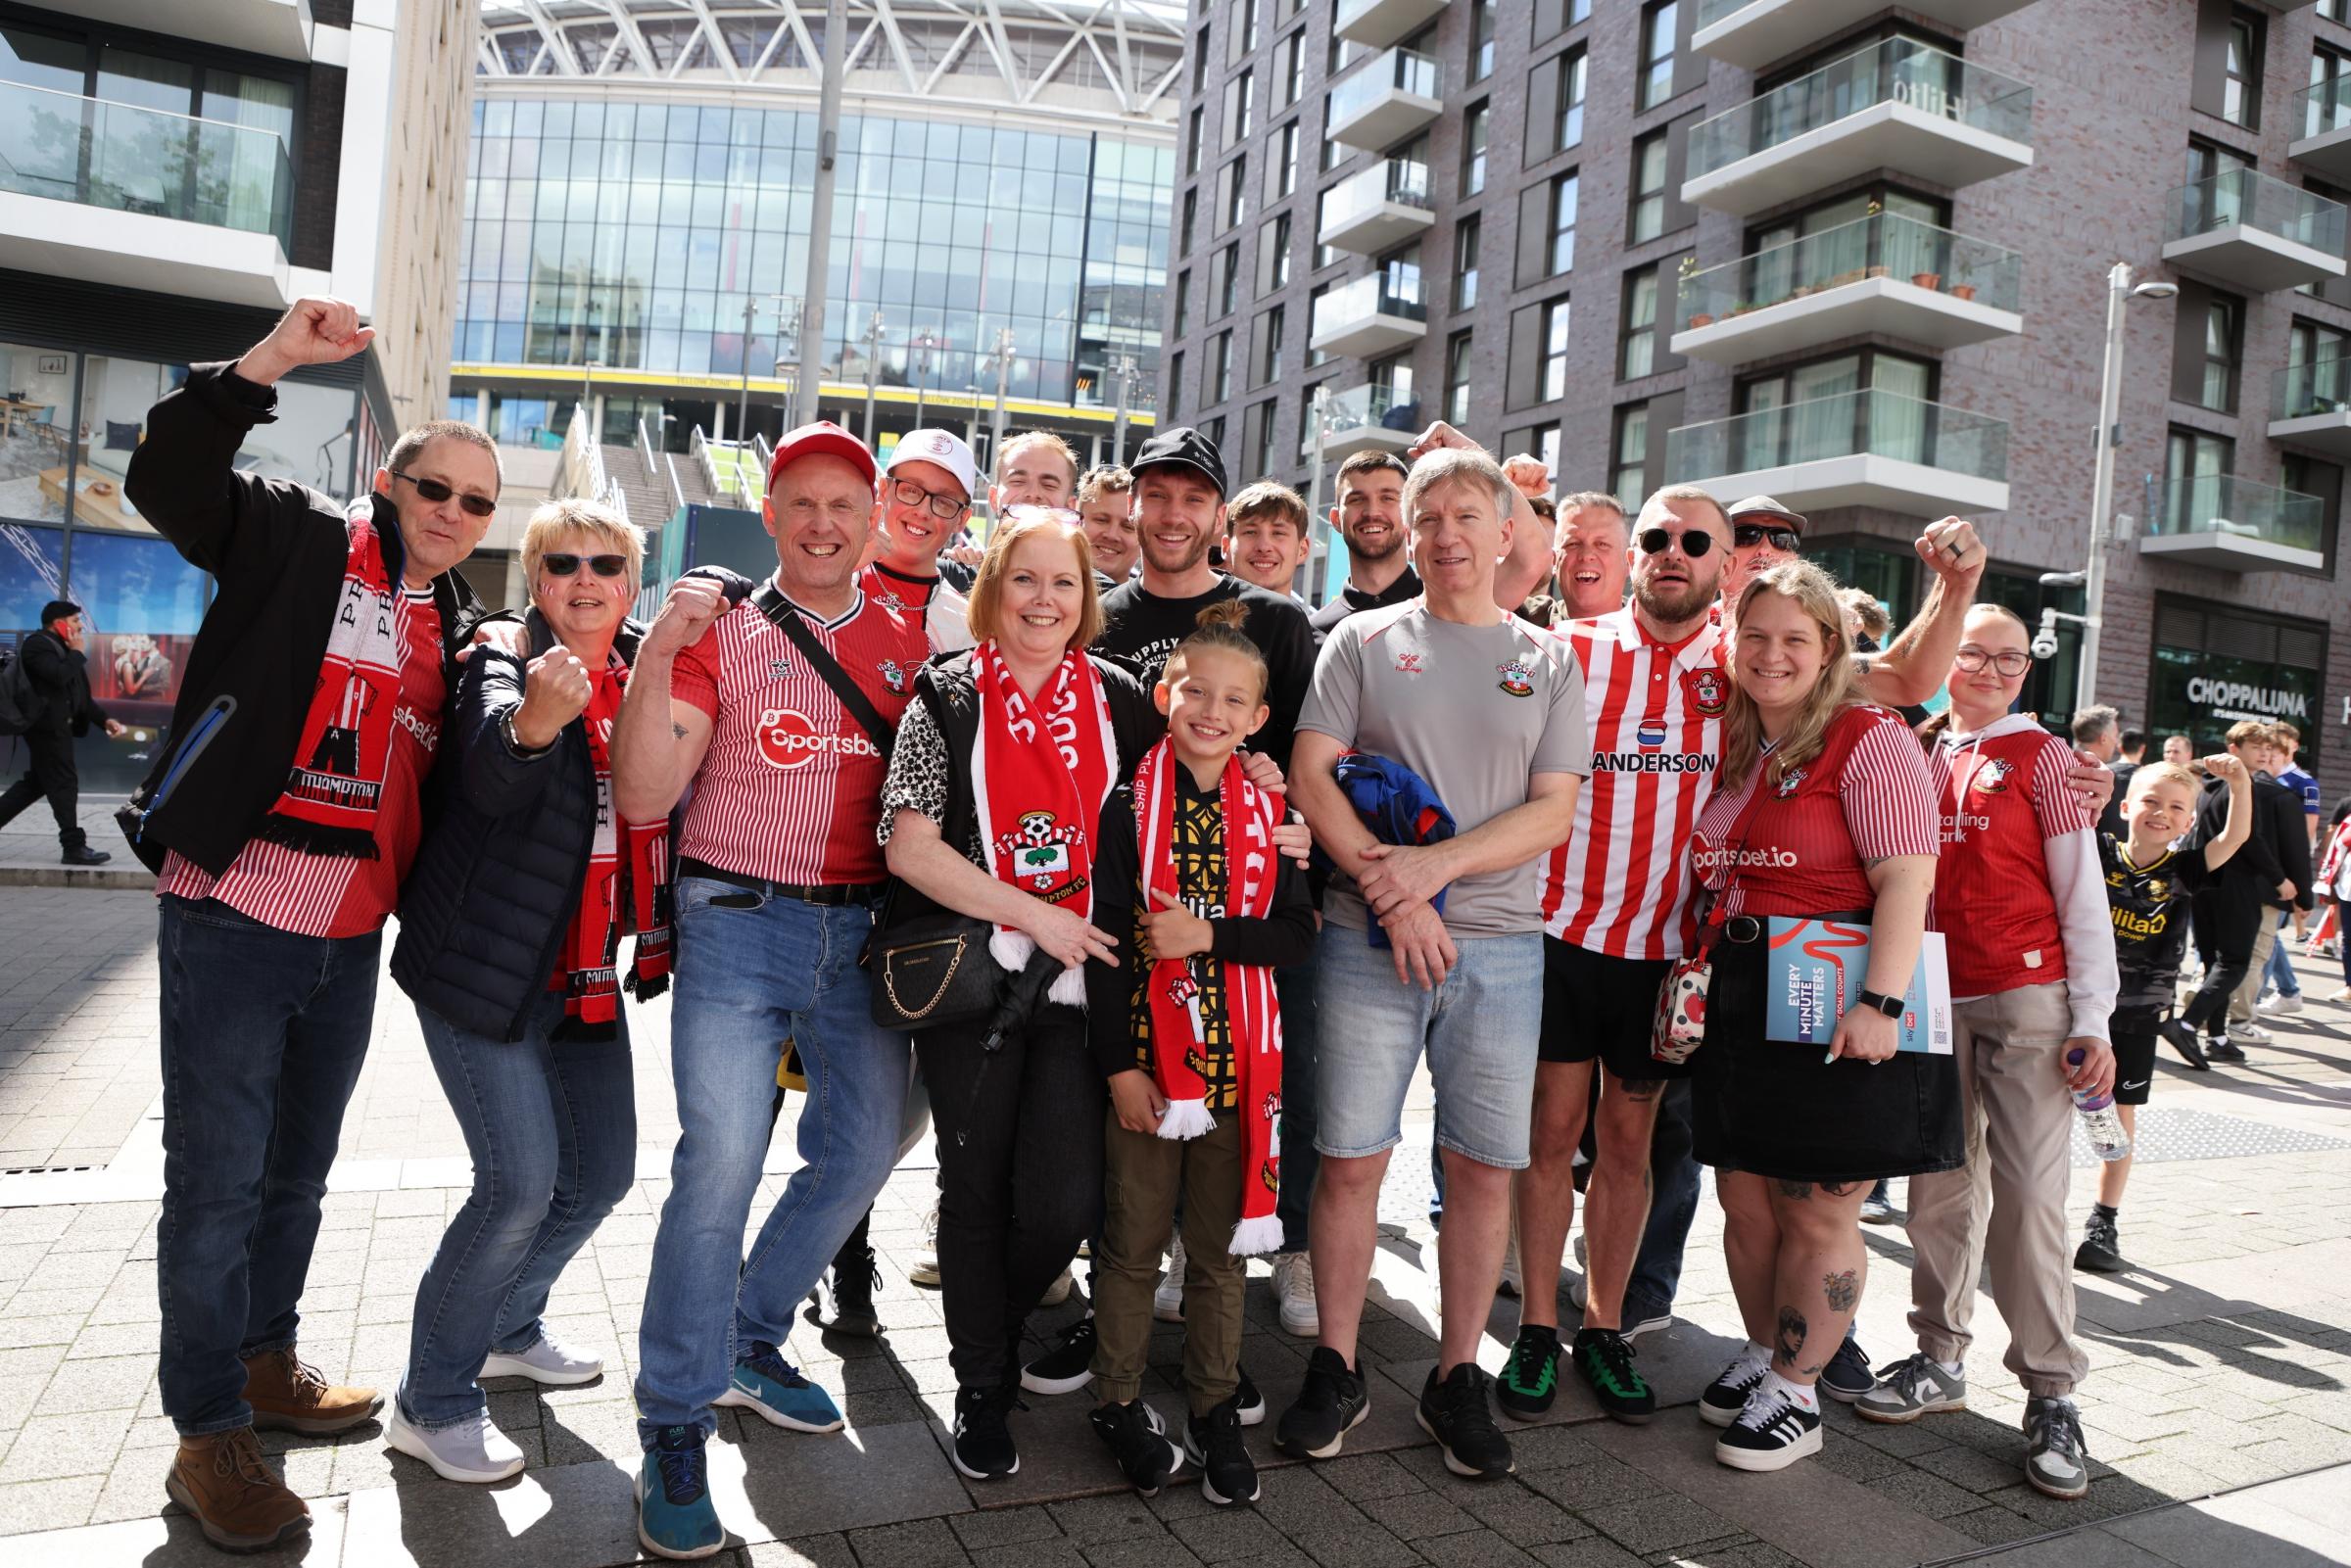 Saints playoff final excitement builds in Southampton